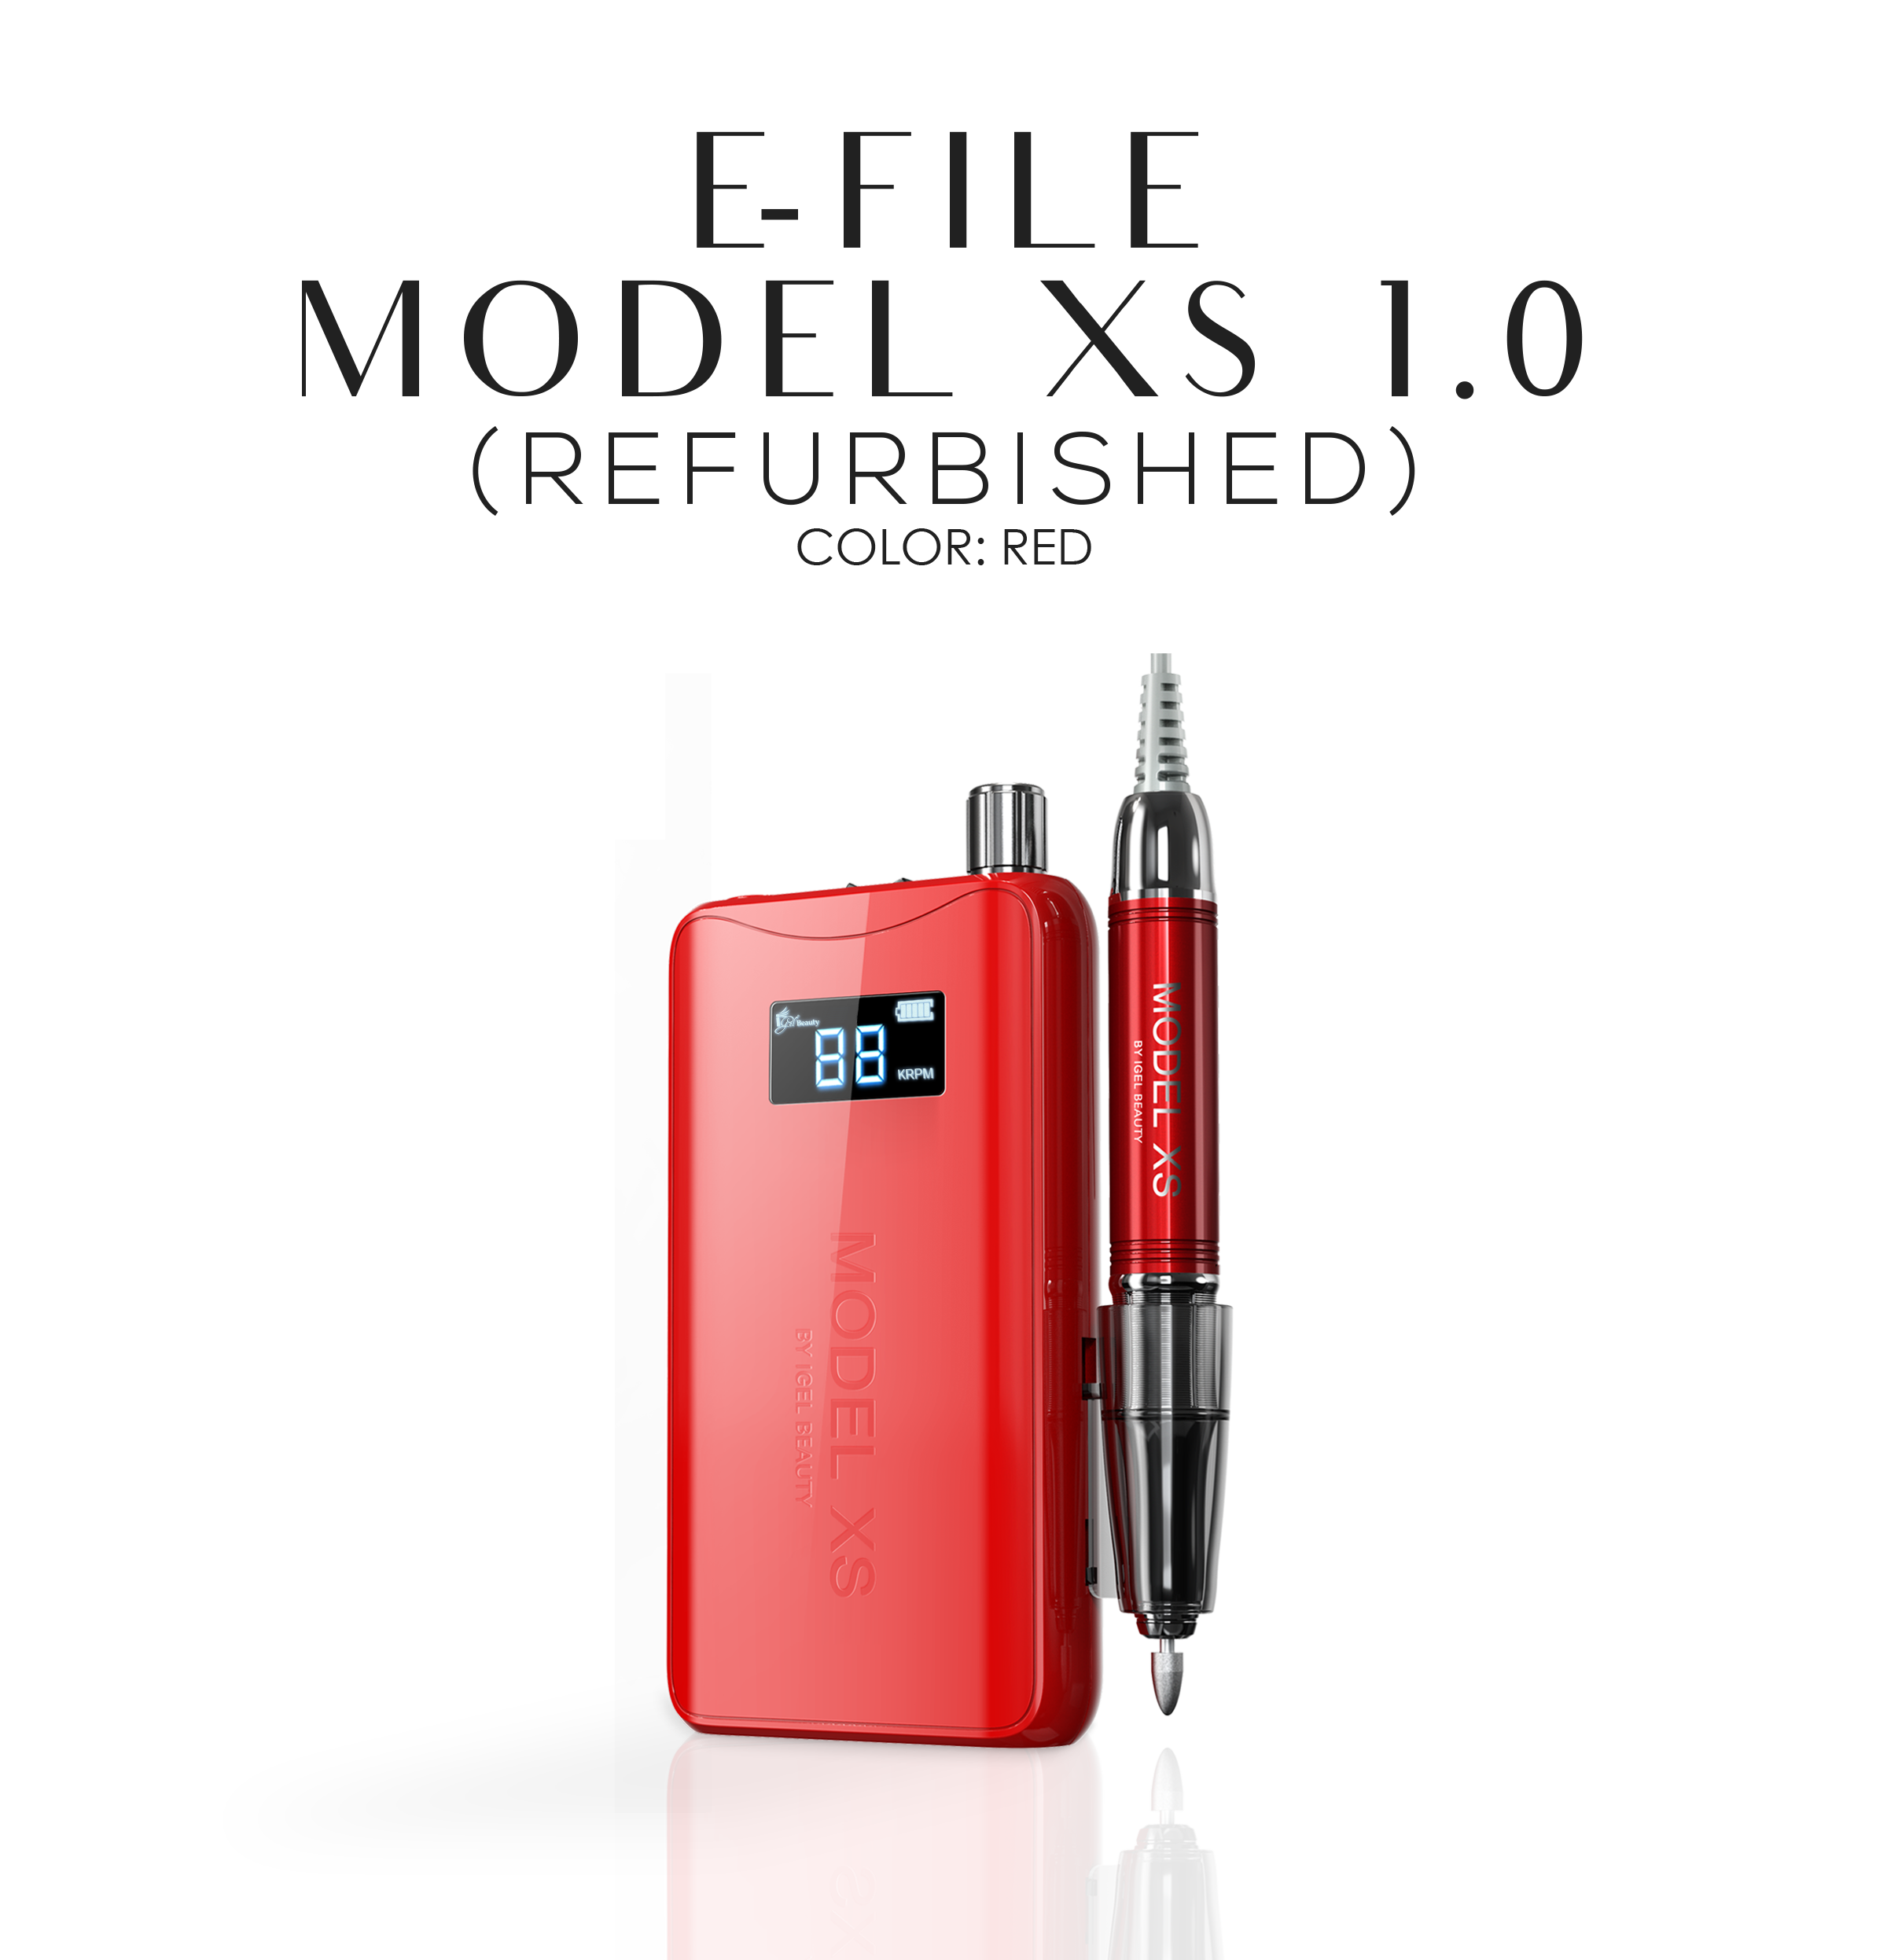 REFURBISHED - MODEL XS 1.0 Wireless Rechargeable E-File - Red